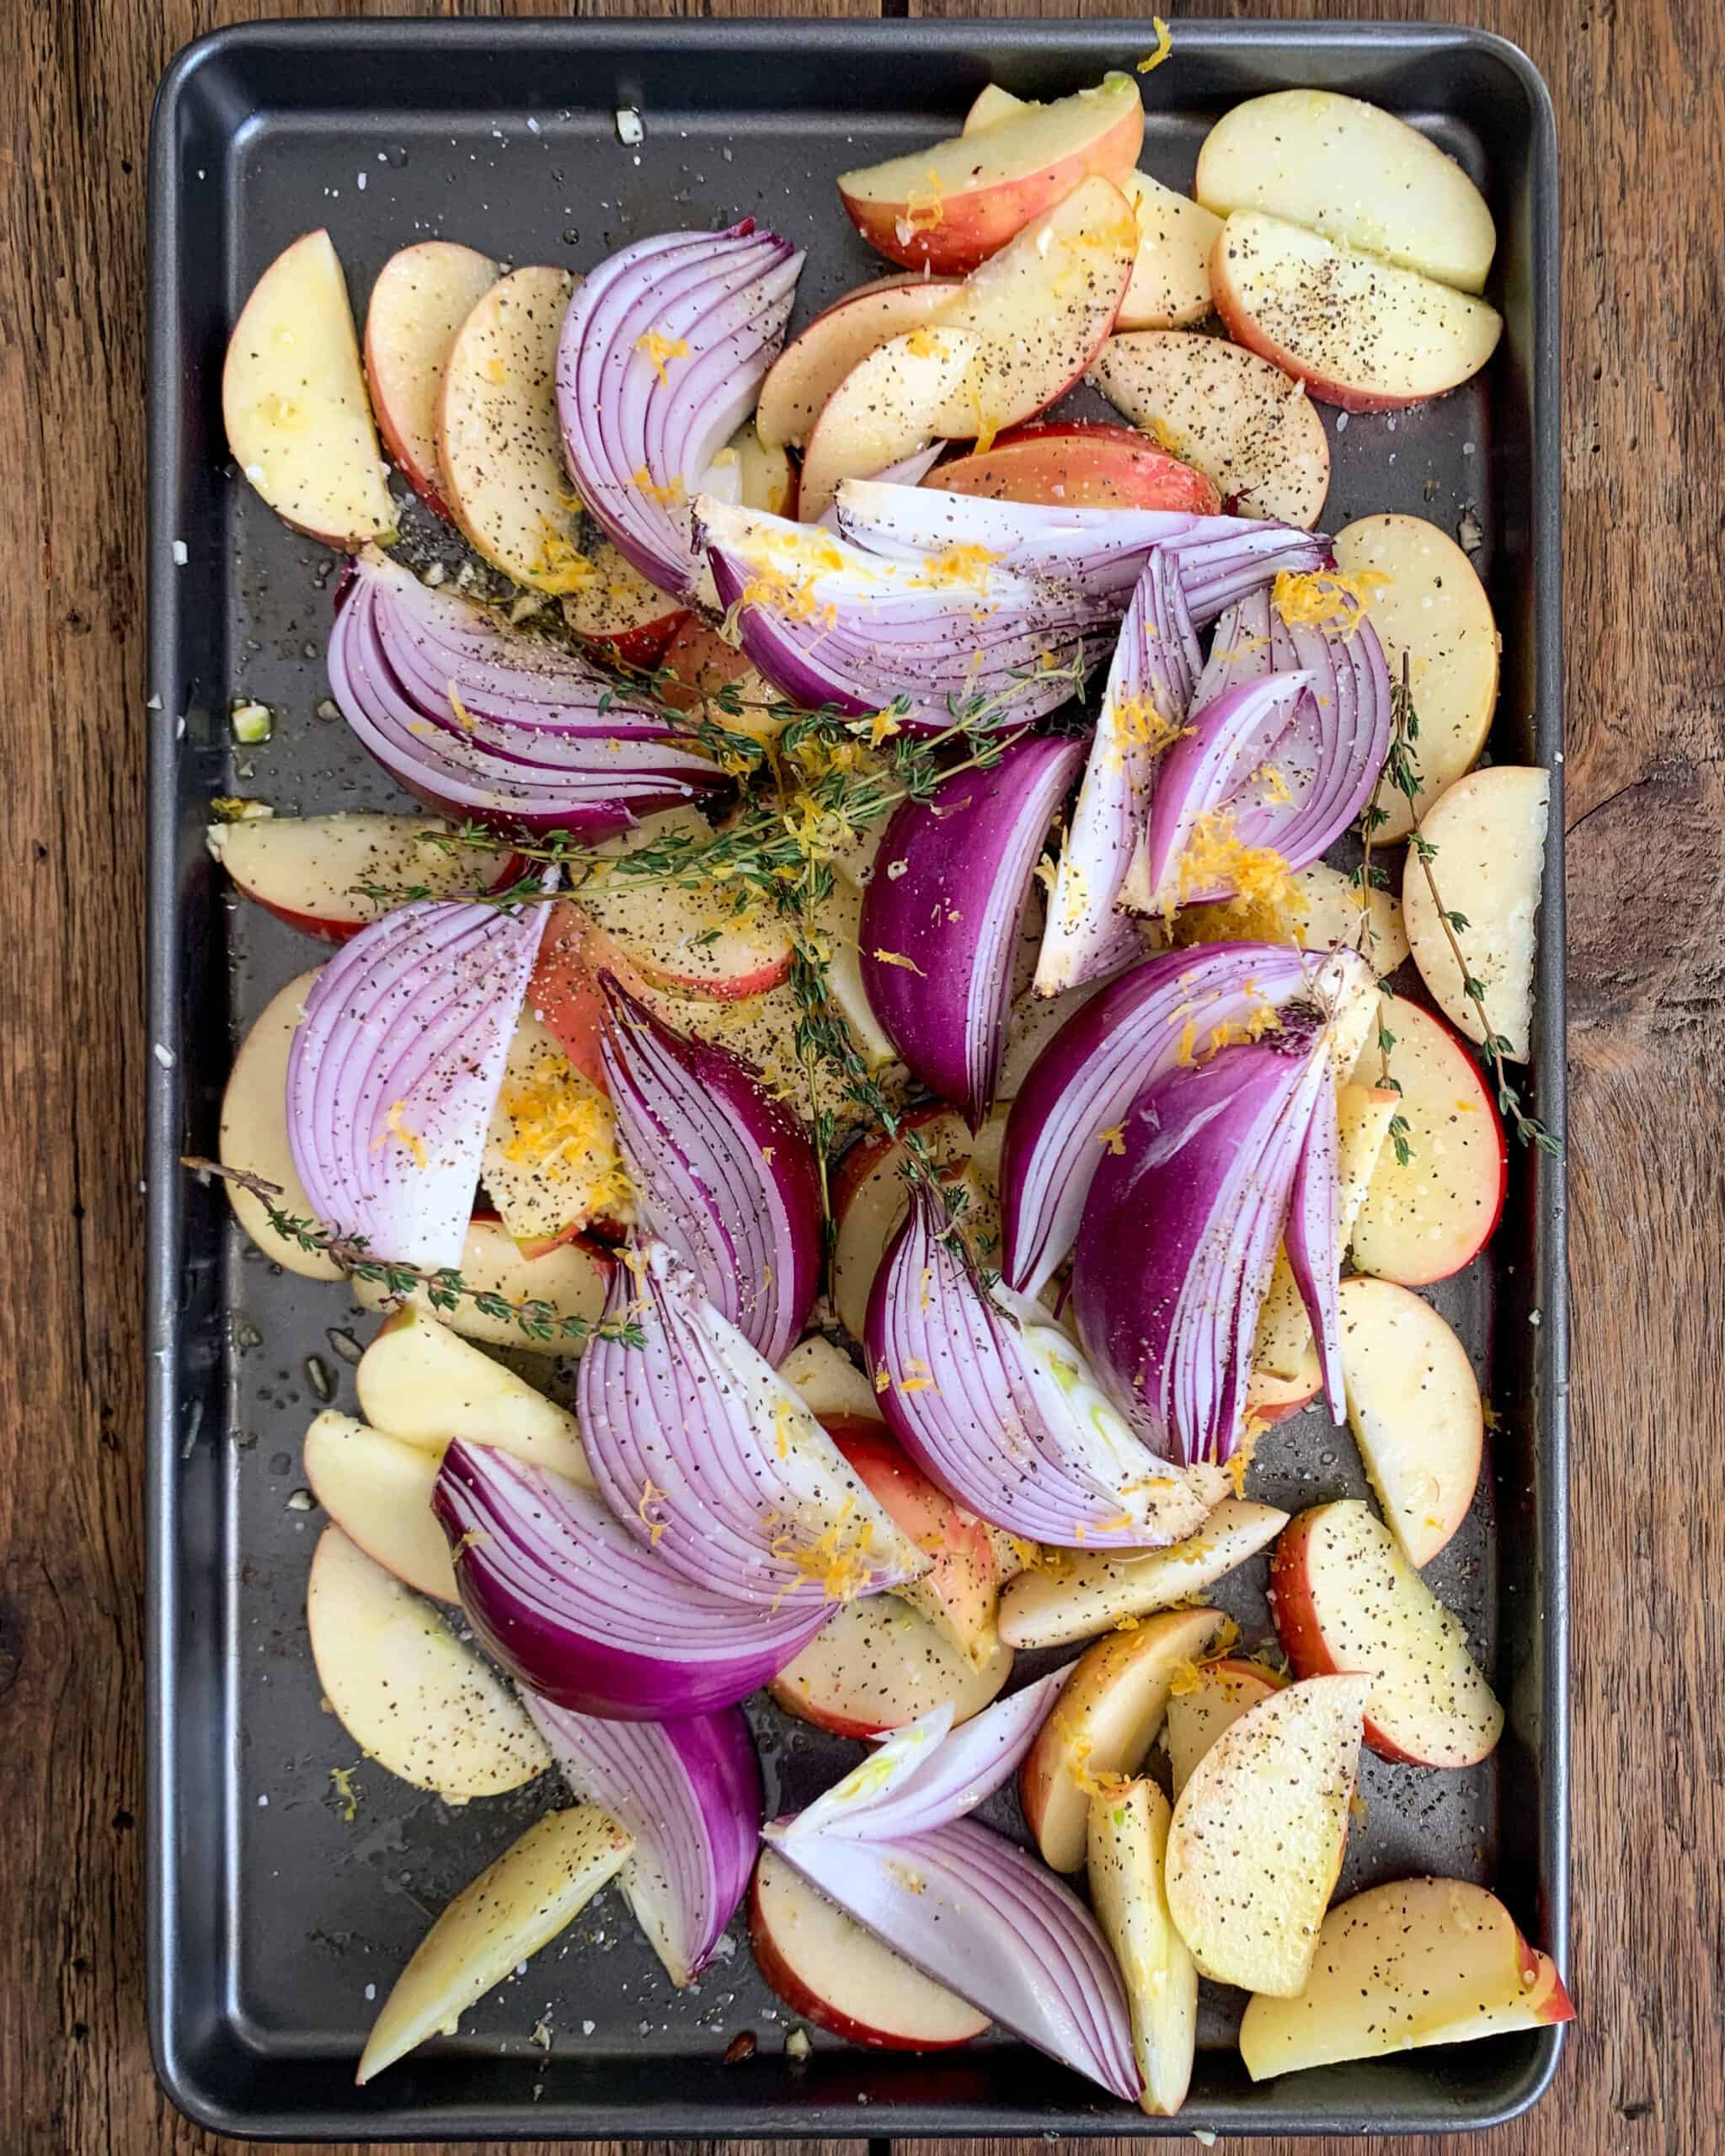 Toss together apples, onions, thyme, 2 tablespoons of olive oil, garlic, lemon zest, ½ salt and 1 teaspoon black pepper. Mix the apple mixture with the fennel and potatoes.